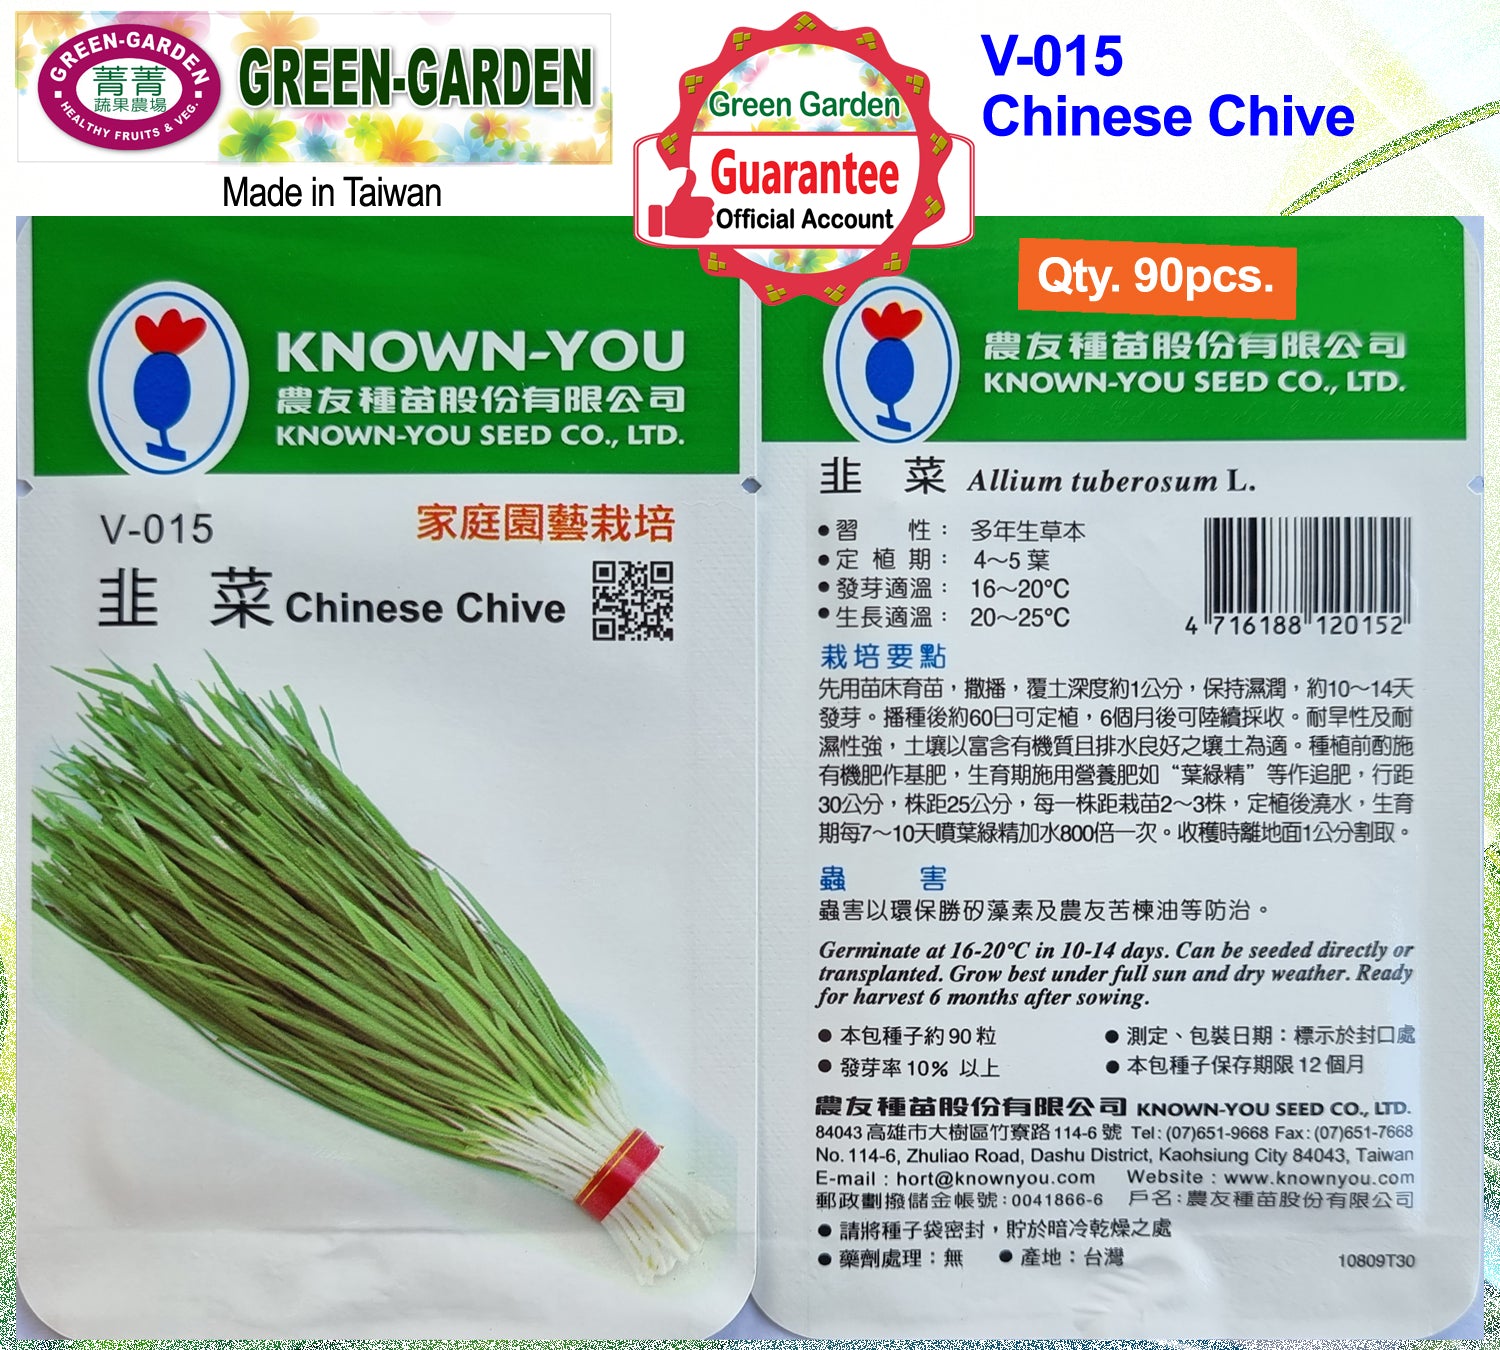 Known You Vegetable Seeds (V-015 Chinese Chive)